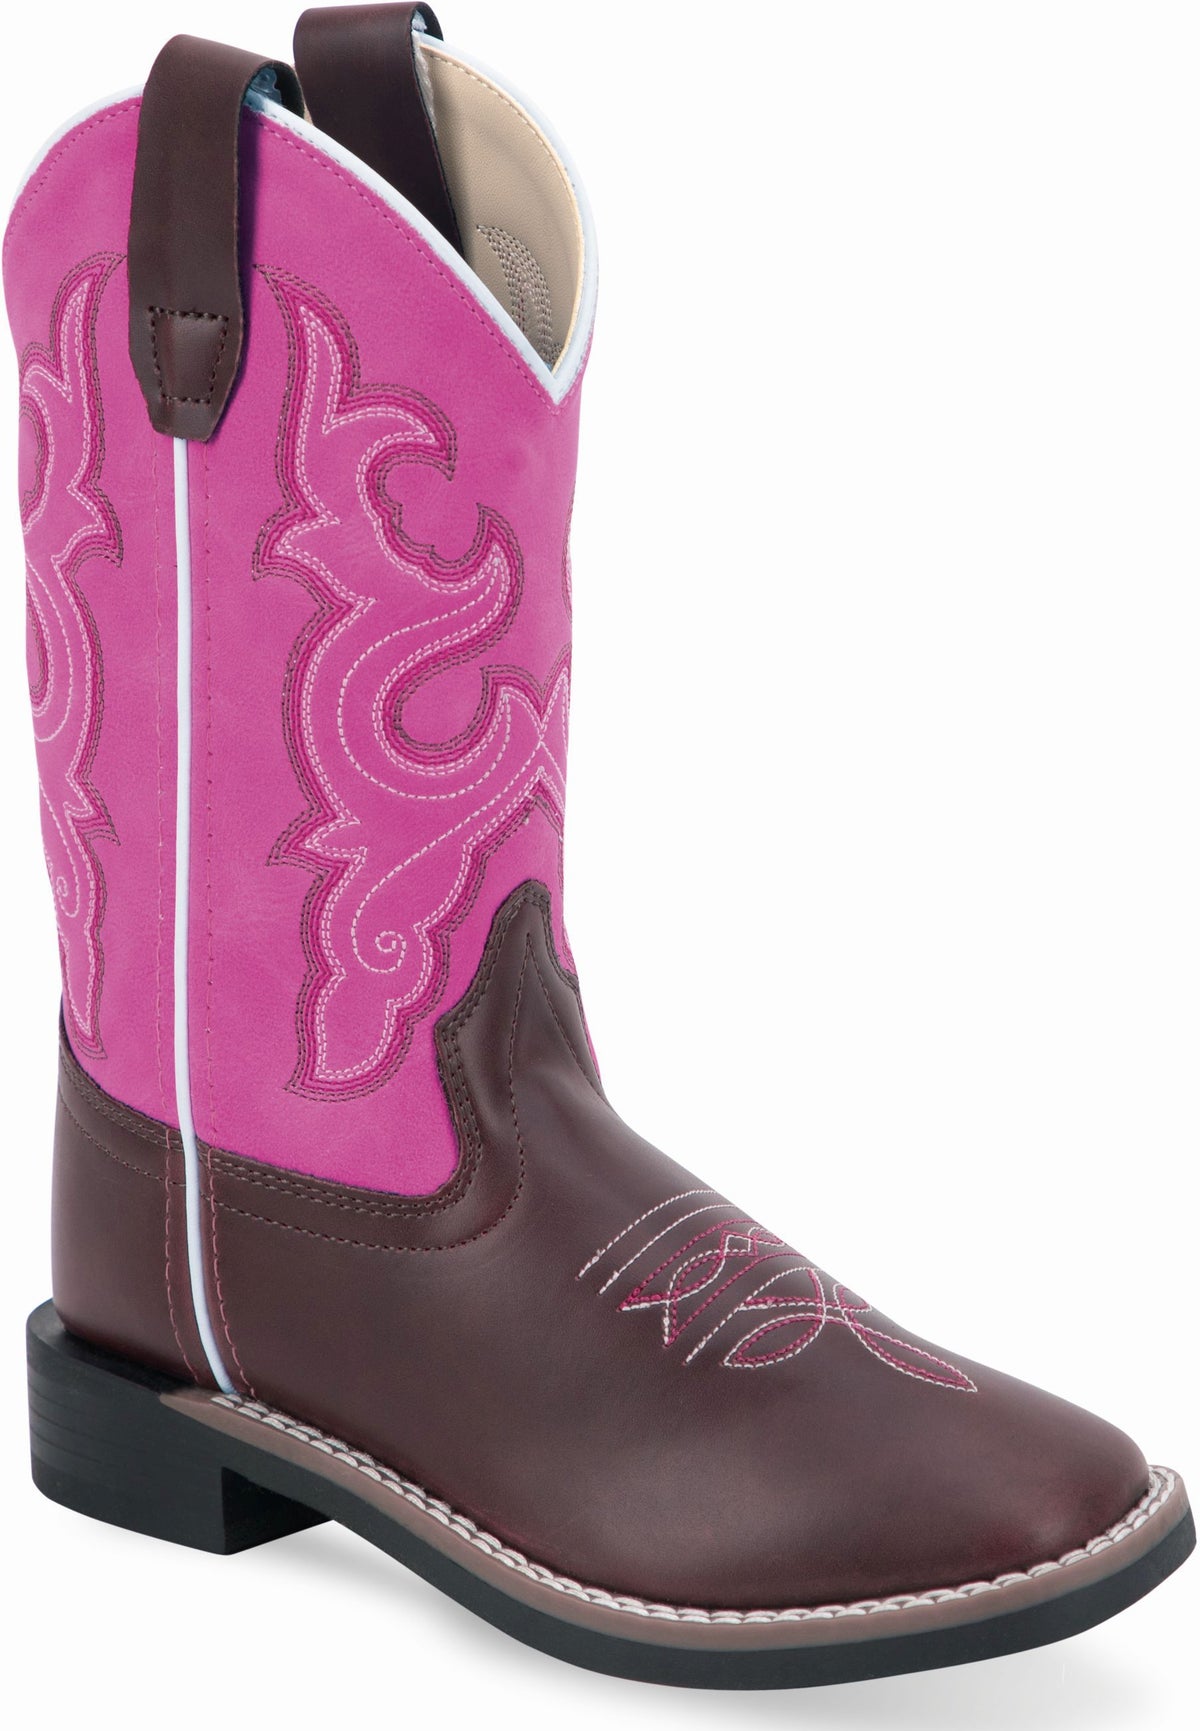 Old West Burnt Brown Foot Pink Shaft Children All Over Leatherette Material Broad Square Toe Boots